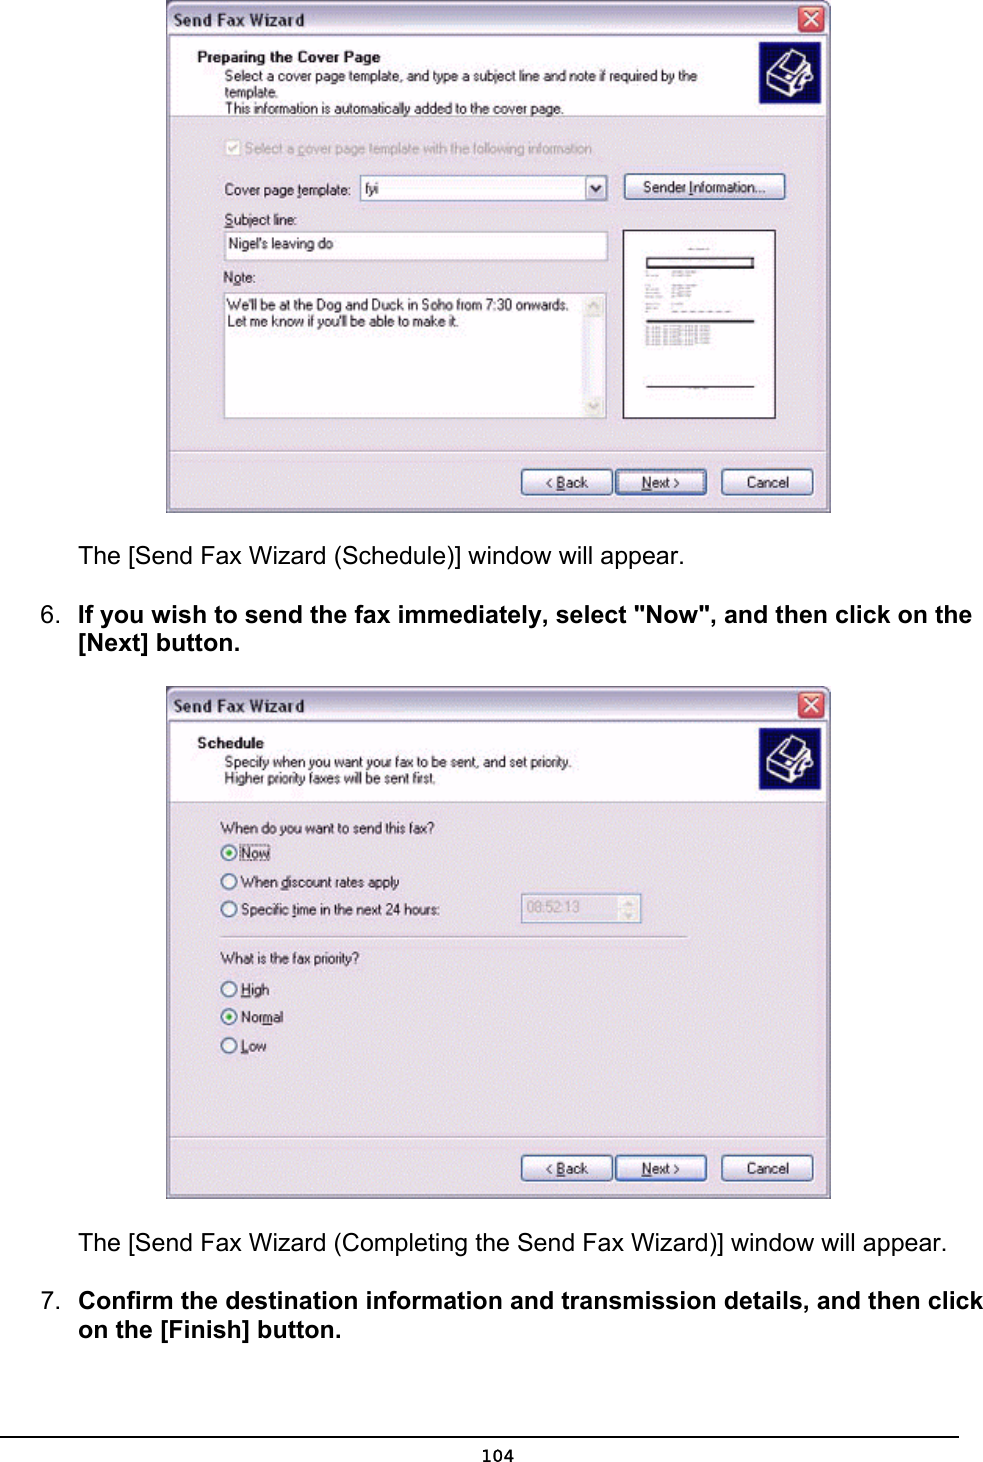      The [Send Fax Wizard (Schedule)] window will appear.   6.  If you wish to send the fax immediately, select &quot;Now&quot;, and then click on the [Next] button.        The [Send Fax Wizard (Completing the Send Fax Wizard)] window will appear. 7.  Confirm the destination information and transmission details, and then click on the [Finish] button.  104